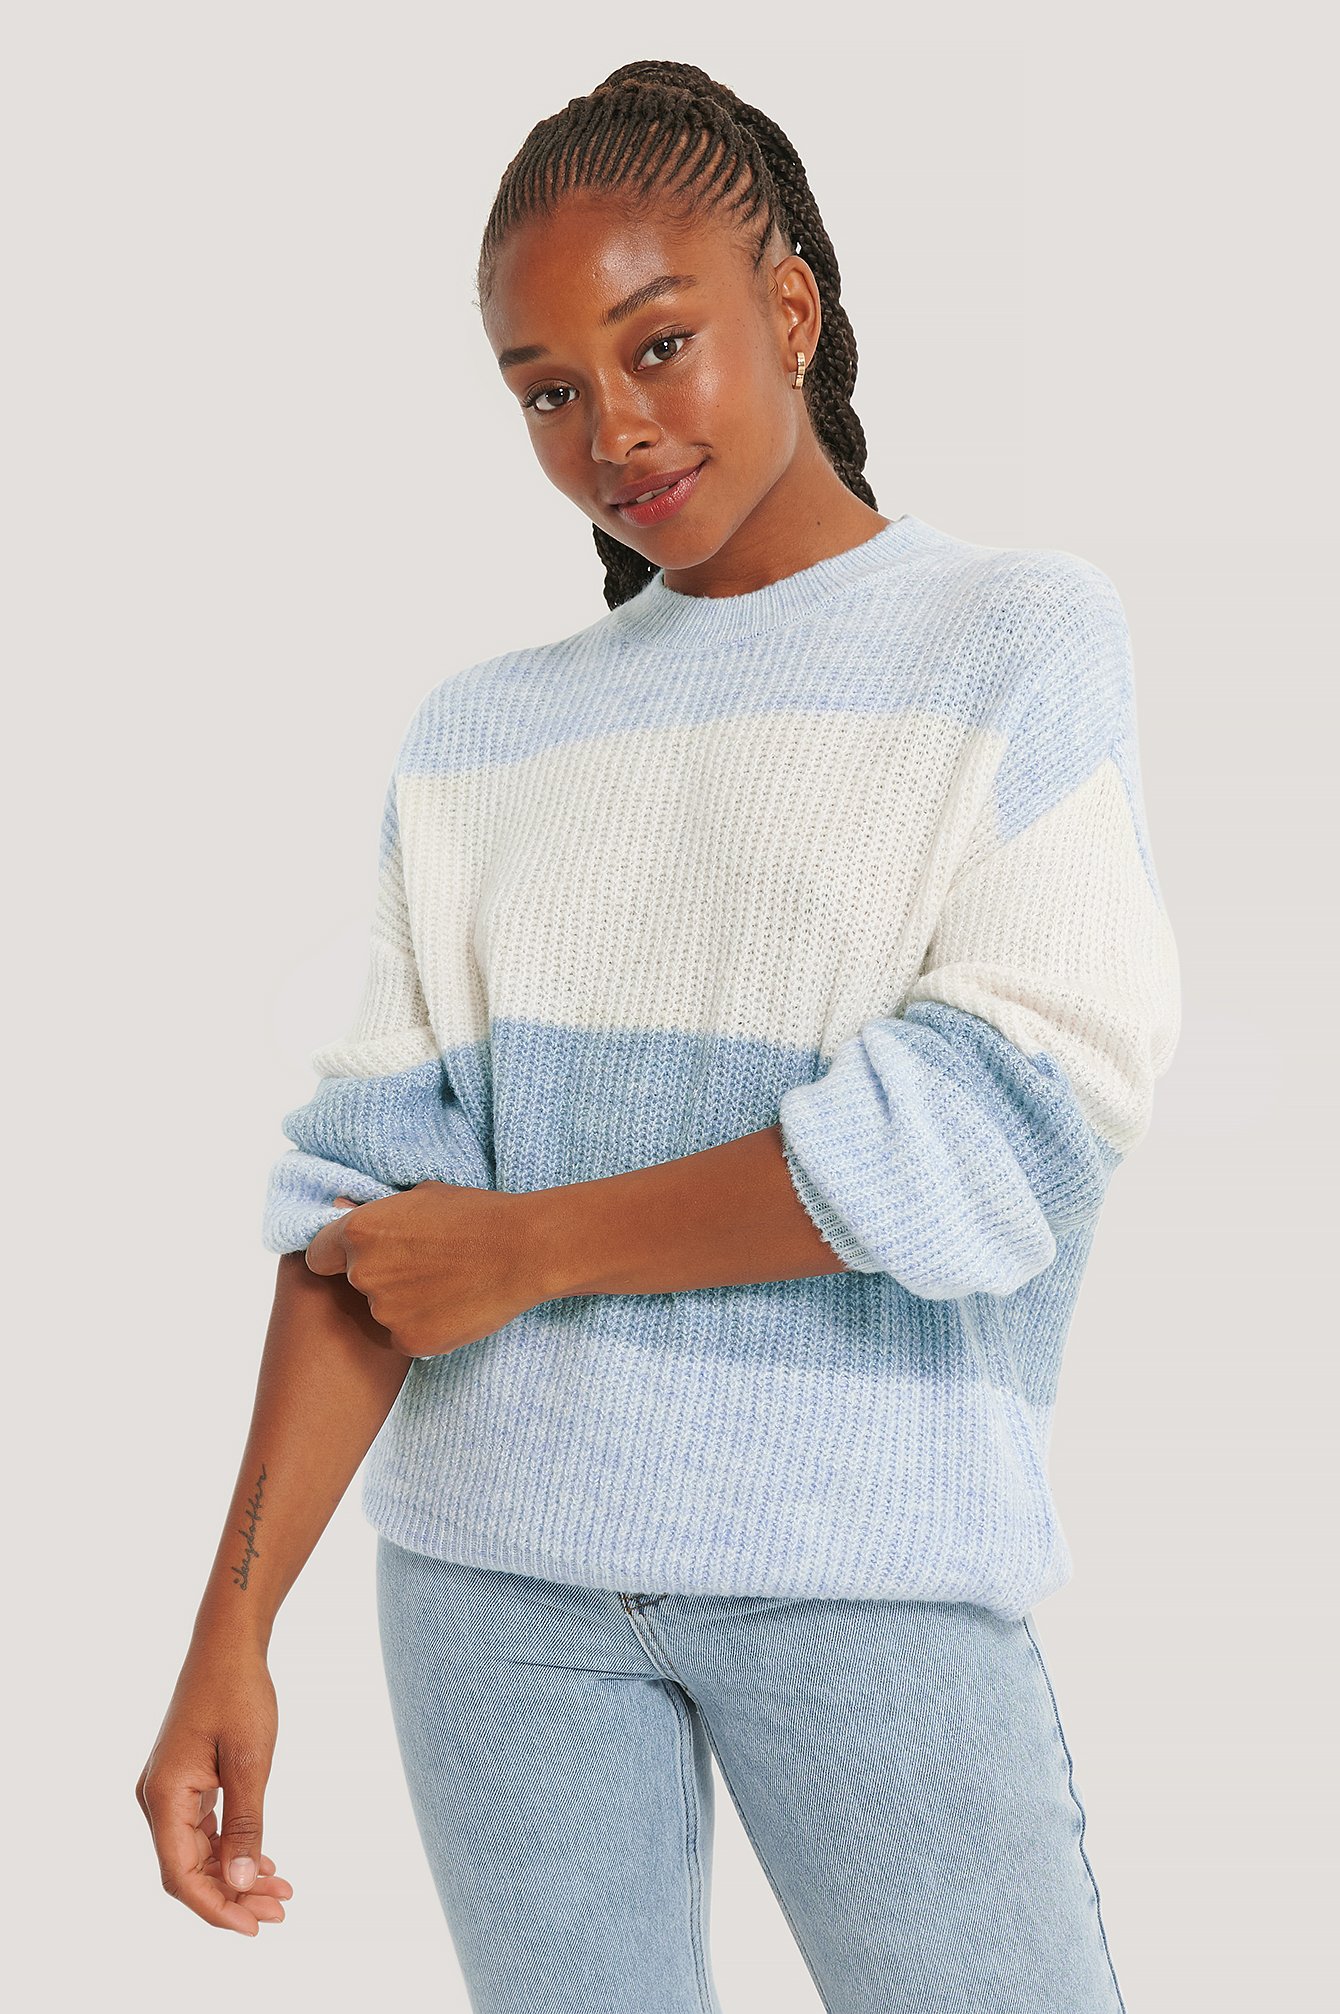 Blue Color Striped Knitted Sweater